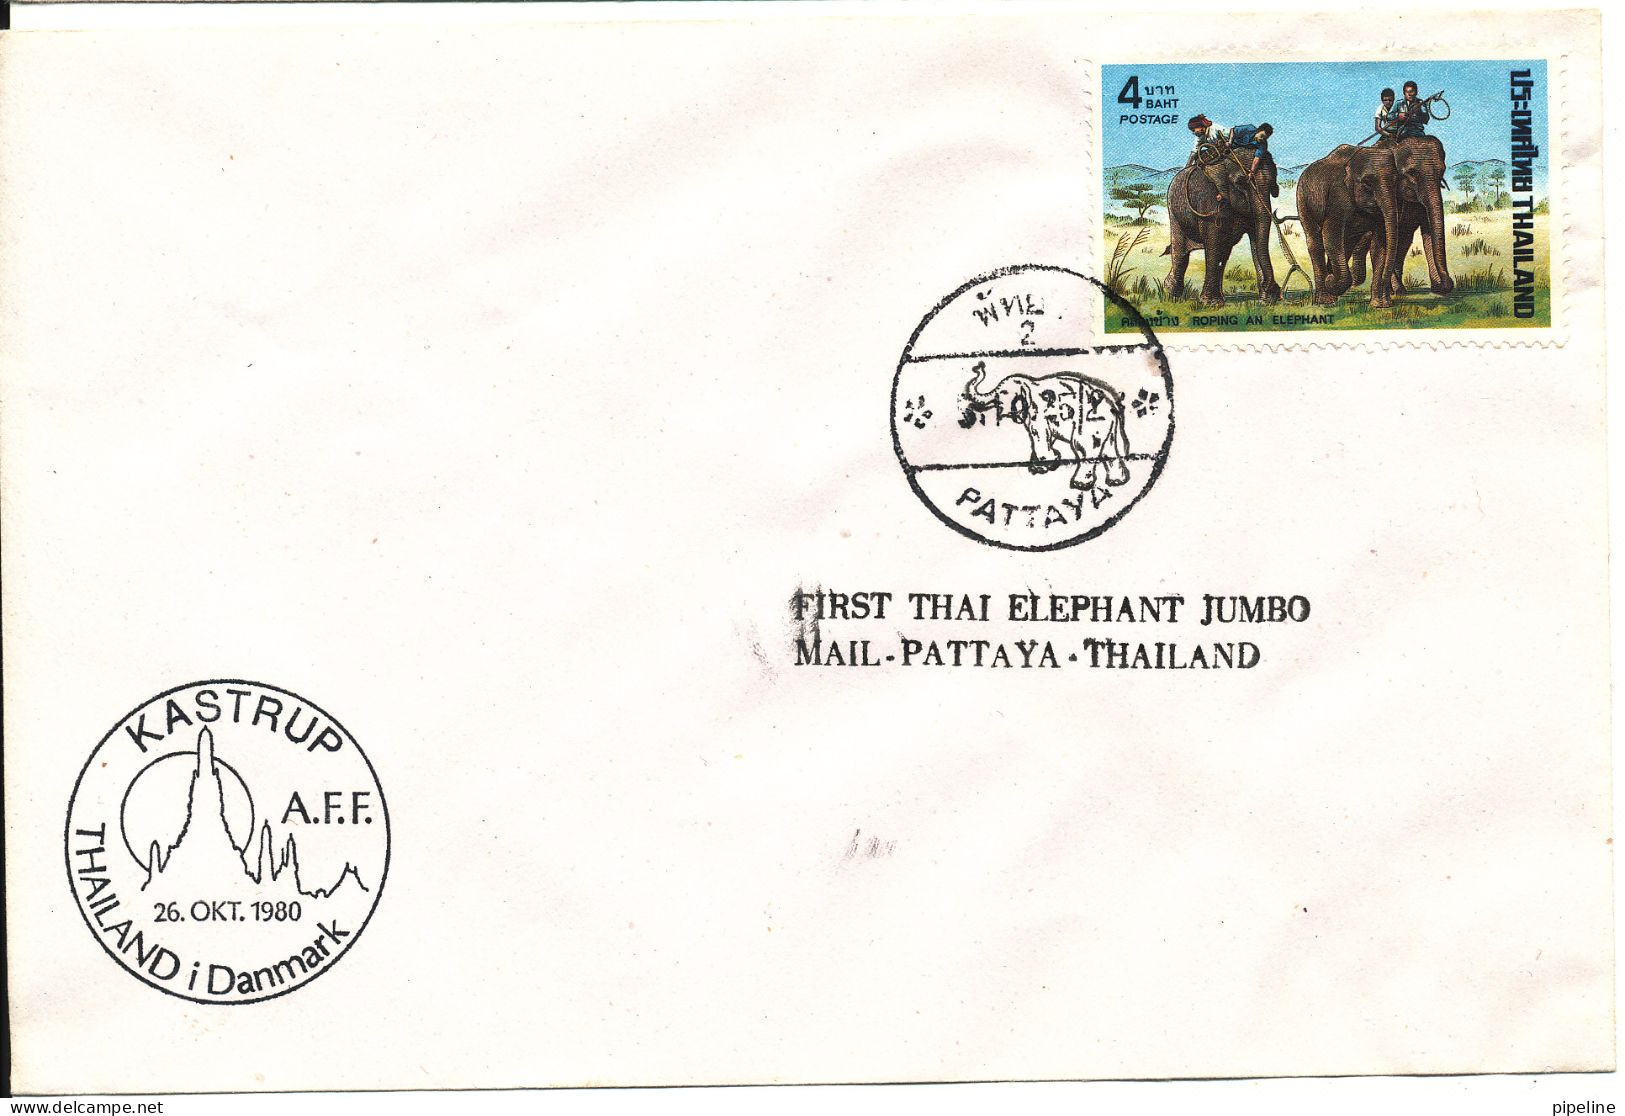 Thailand Cover With Elephant Stamp FIRST THAI ELEPHANT JUMBO MAIL PATTAYA - Thailand